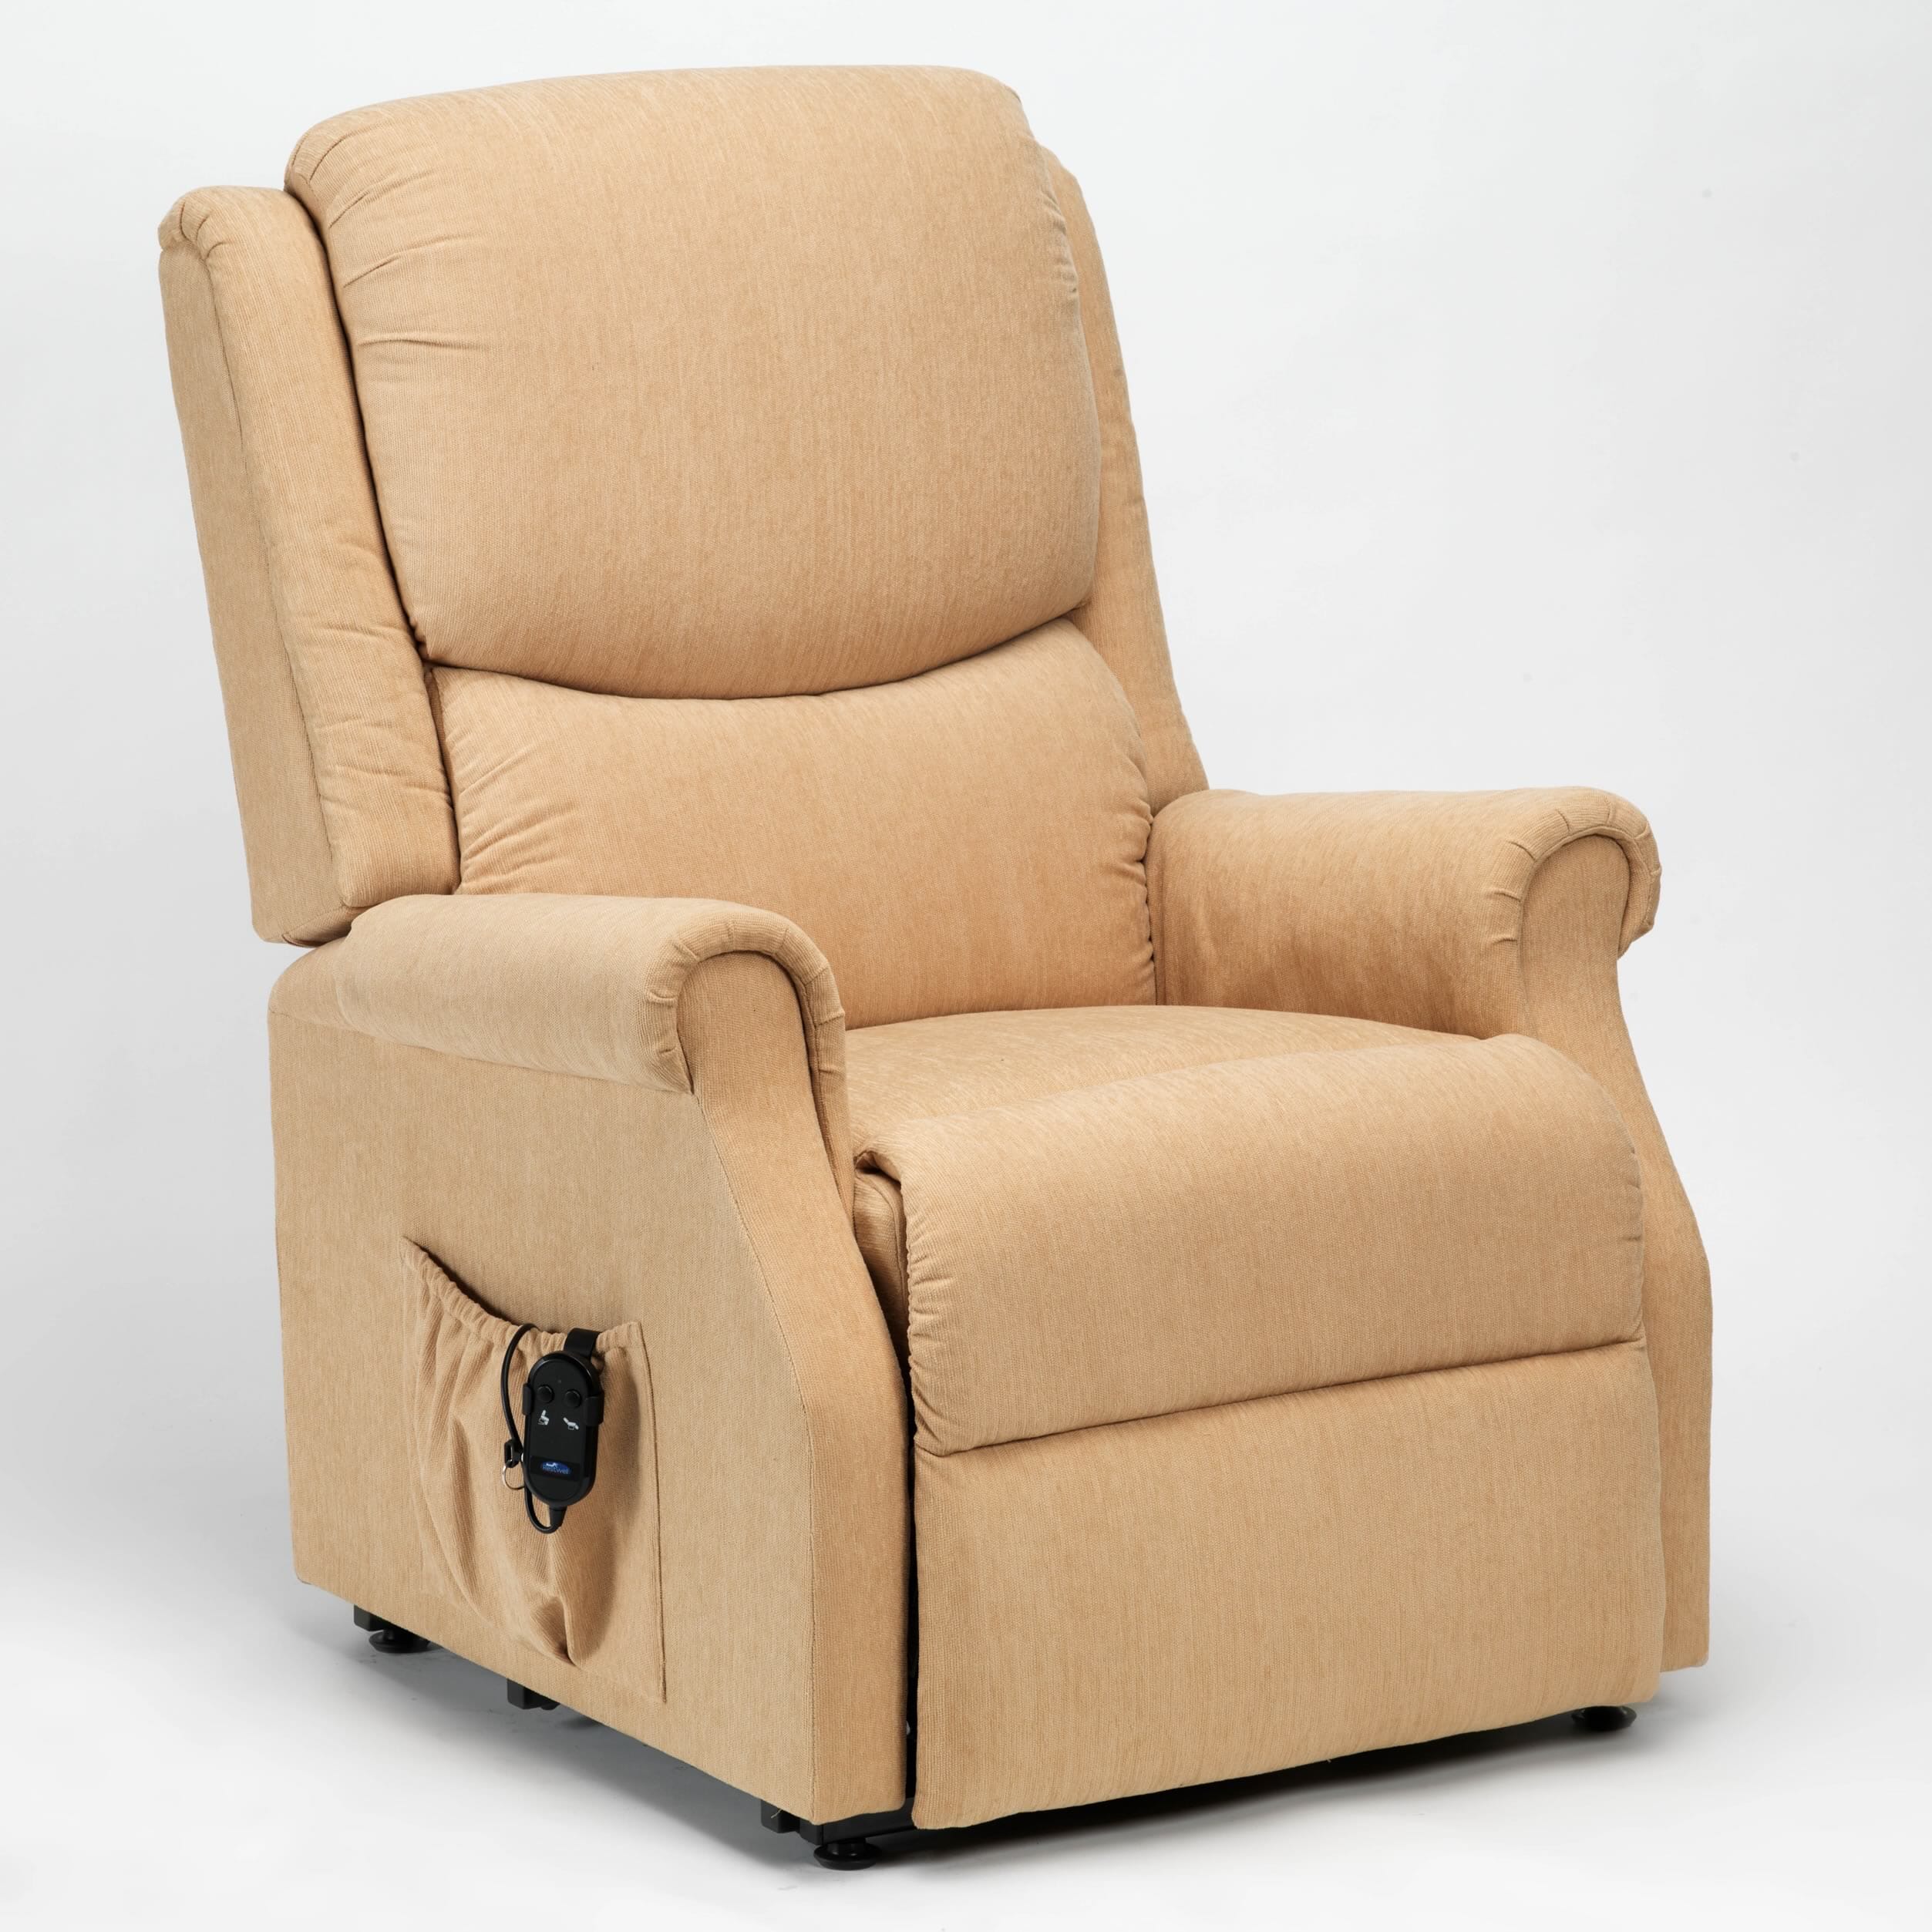 View Indiana Rise and Recline Chair Standard Biscuit information